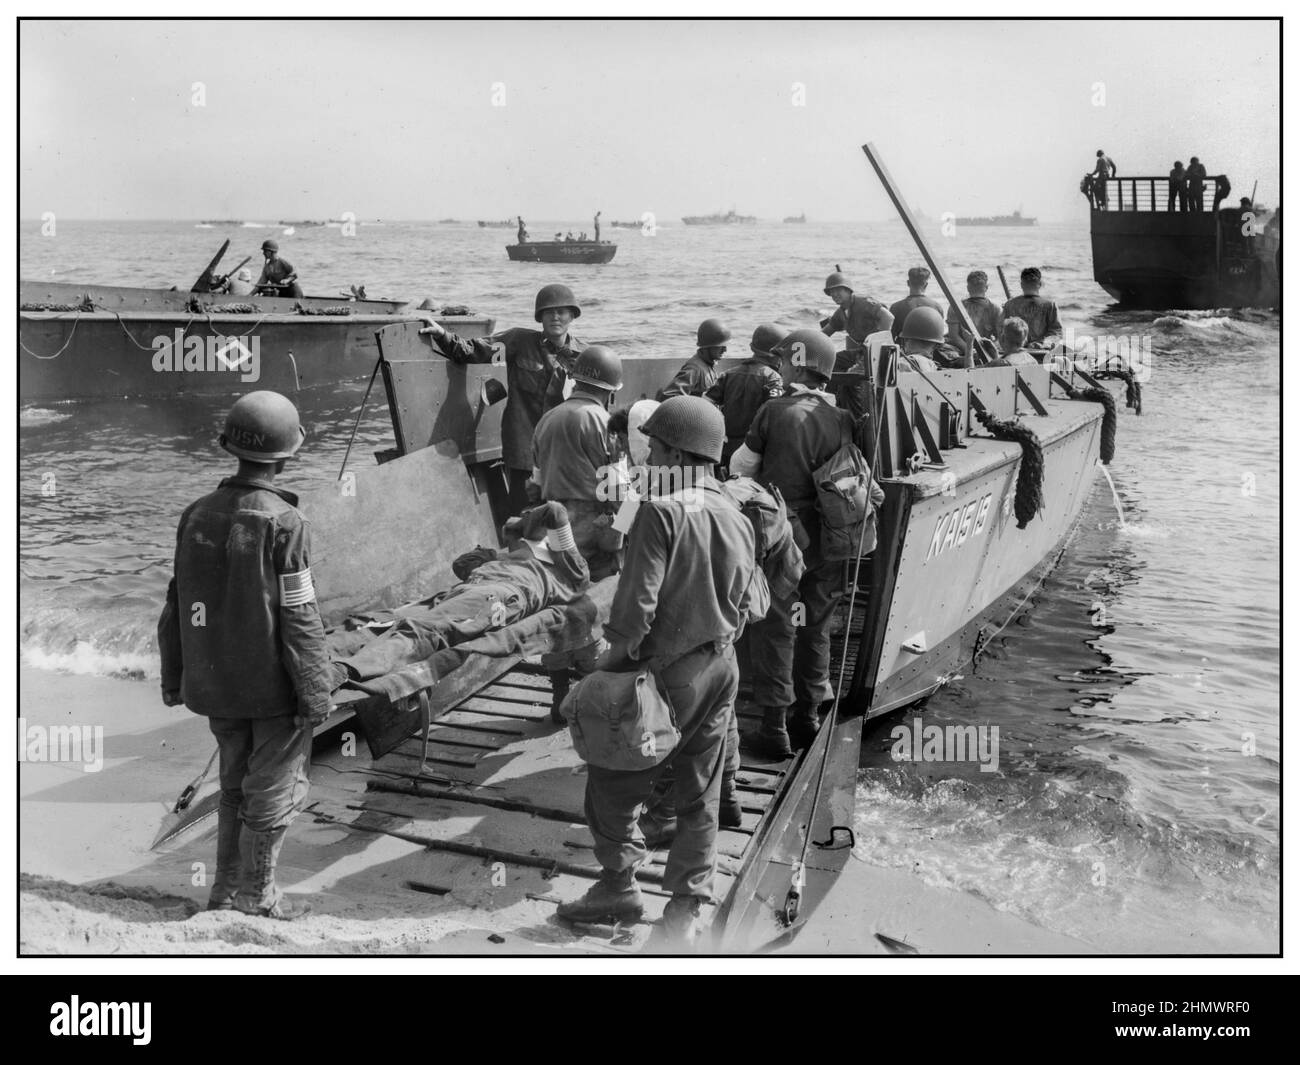 1944 WW2 St. Tropez wounded US soldiers are loaded onto a LCVP for transfer to hospital ship Invasion troops of U.S. Army establishes a beachhead in Saint-Tropez, France during World War II.  Wounded U.S. soldiers are placed aboard LCVPs (Landing Craft, Vehicle, Personnel)            South of France 1944 World War II Second World War Stock Photo